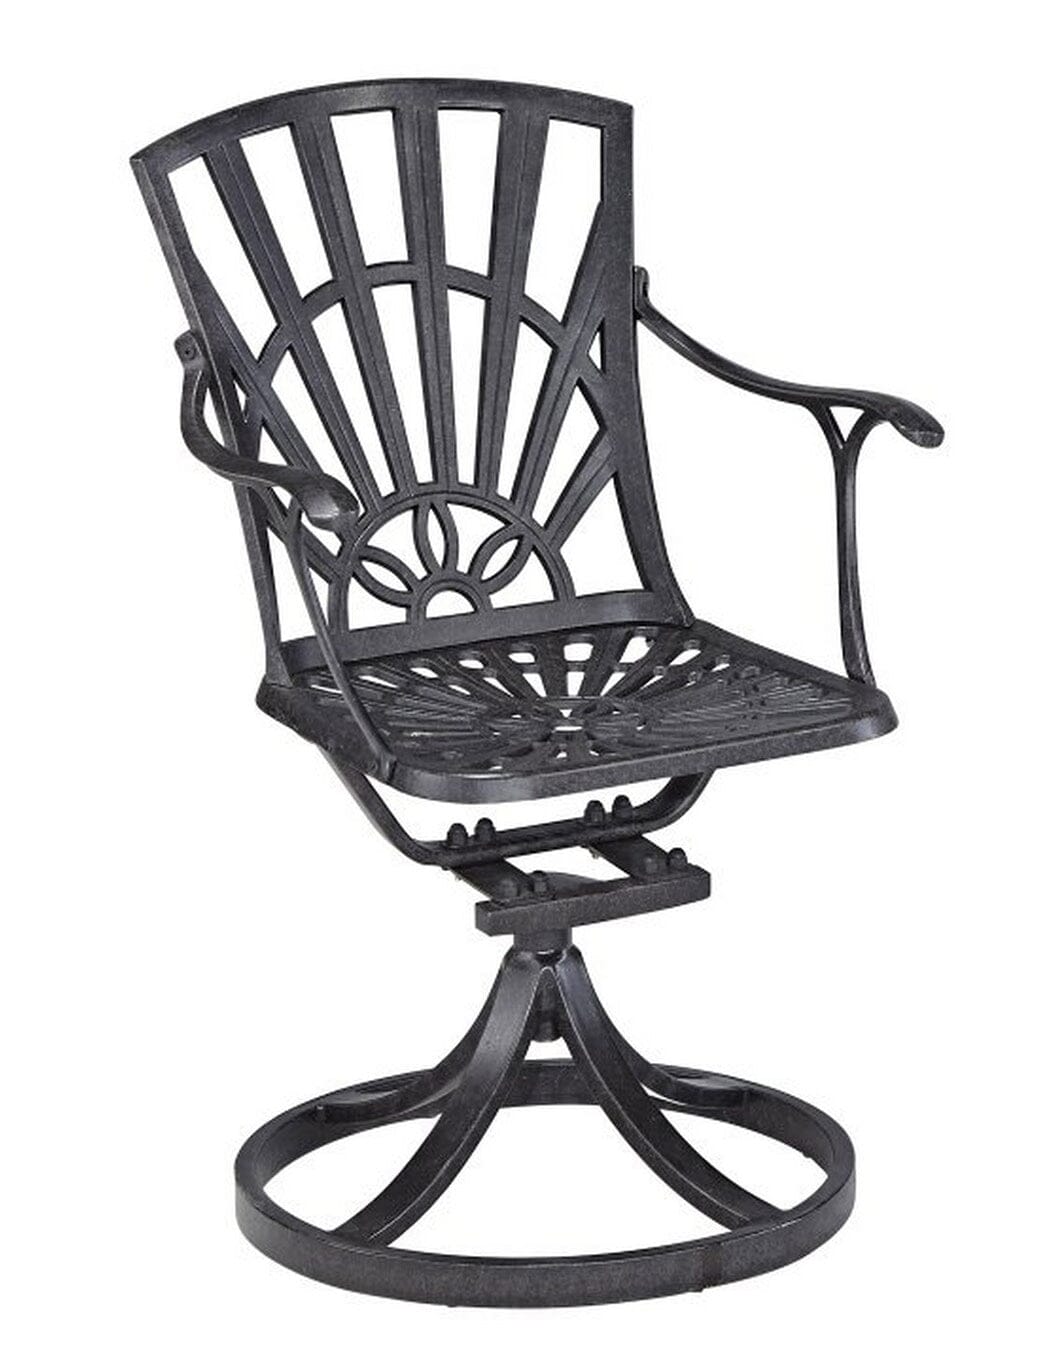 Traditional Outdoor Swivel Rocking Chair By Grenada Outdoor Seating Grenada